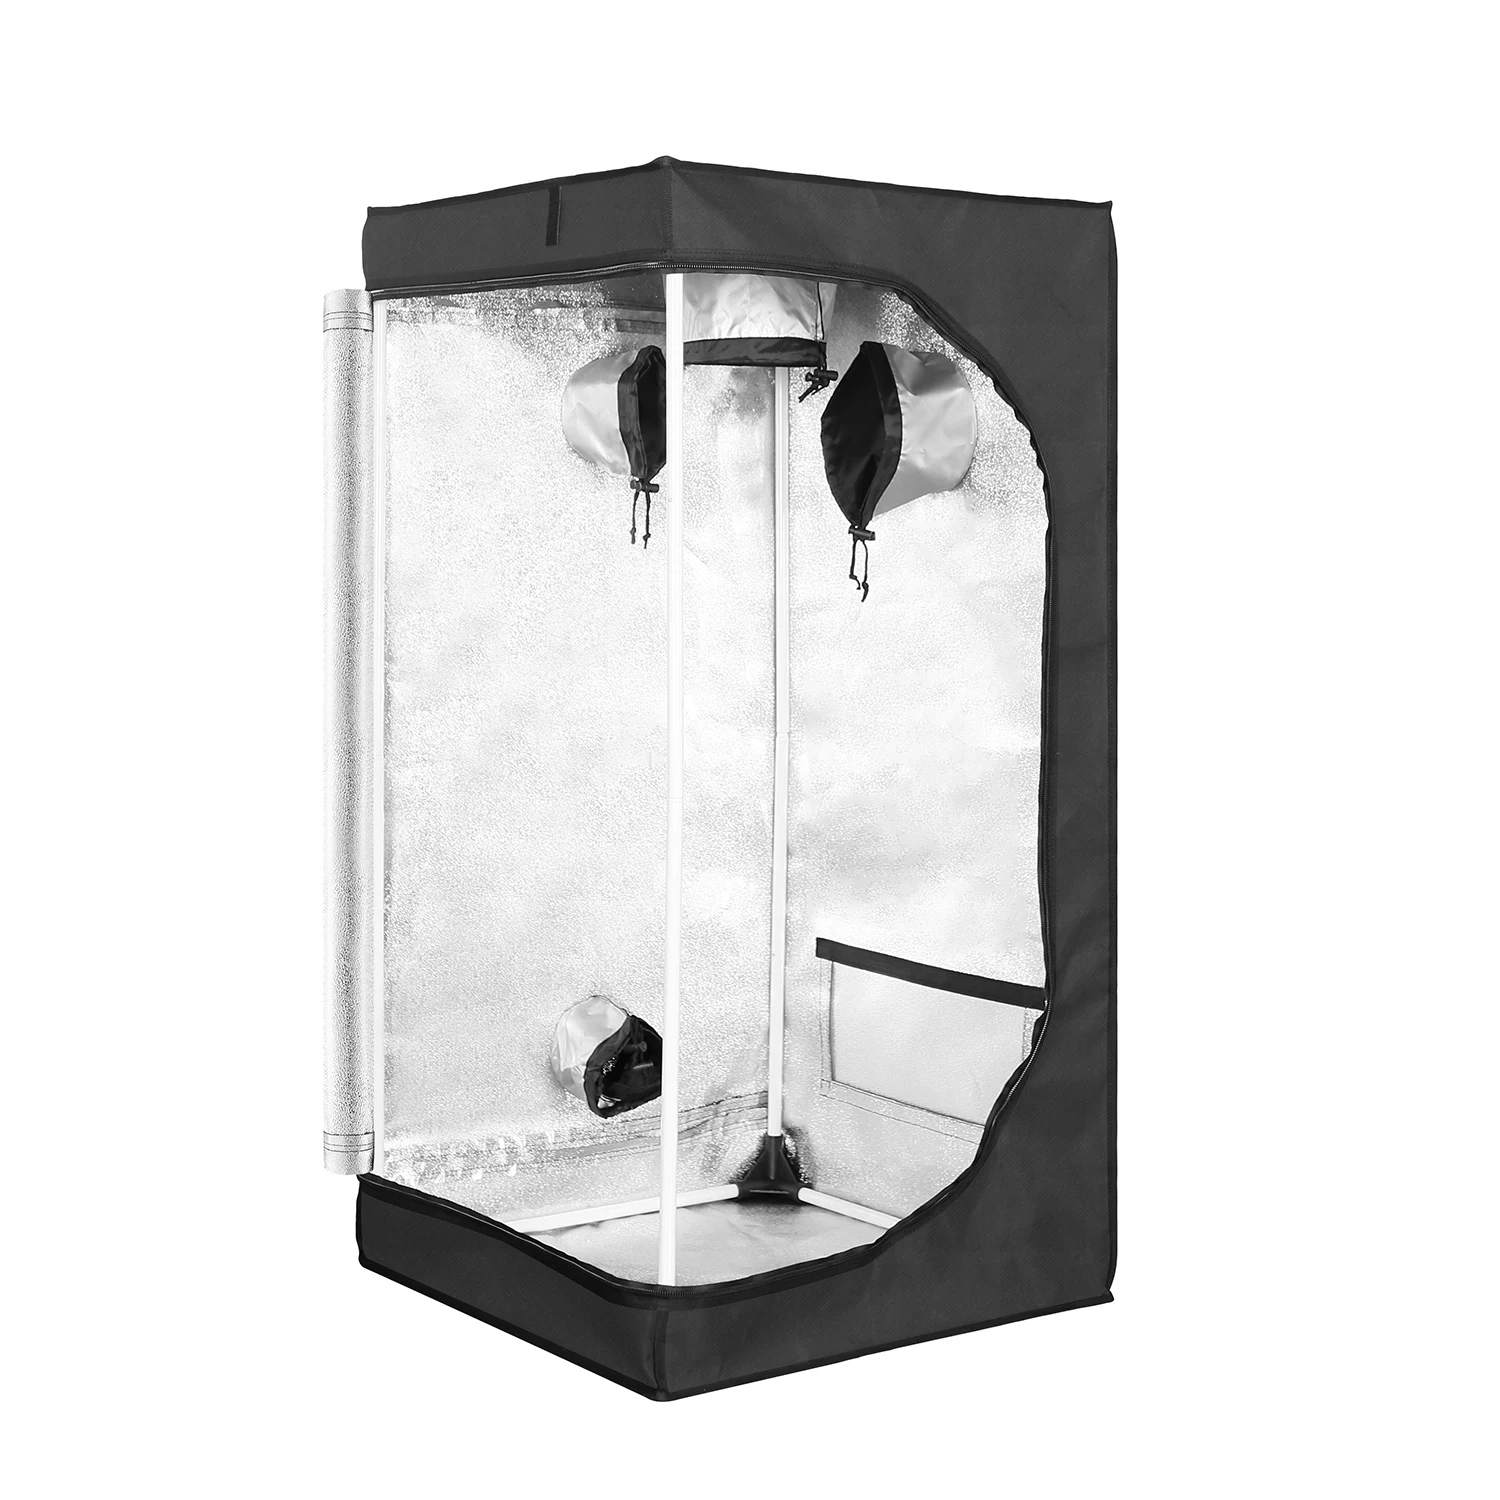 

New style green house hydroponics growing system with 600D/1680D mylar grow tent, Black